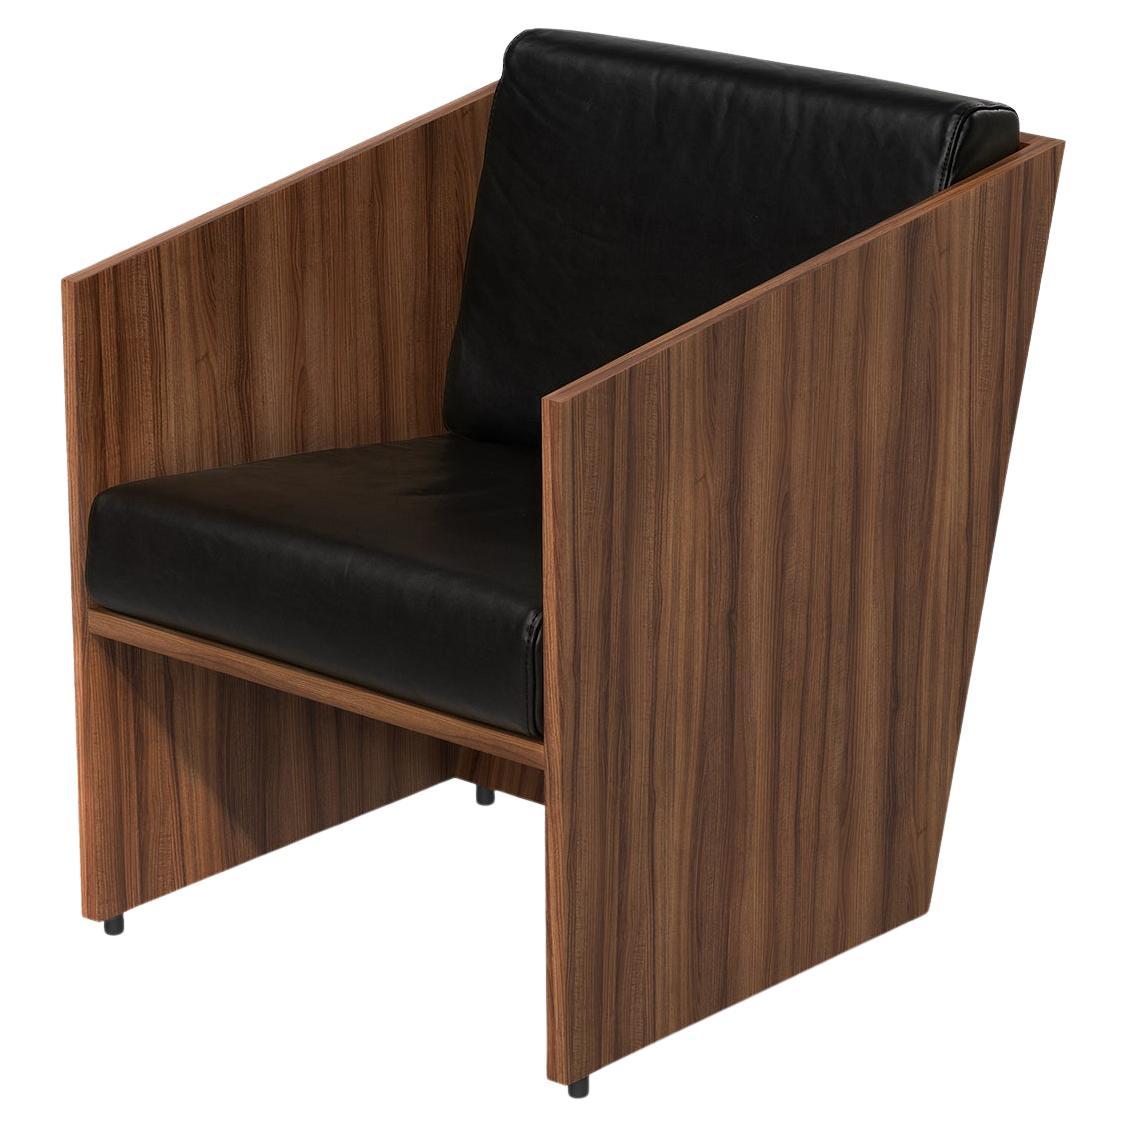 Álvaro Siza Vieira - Armchair in Walnut Wood and Black Leather - one of a kind